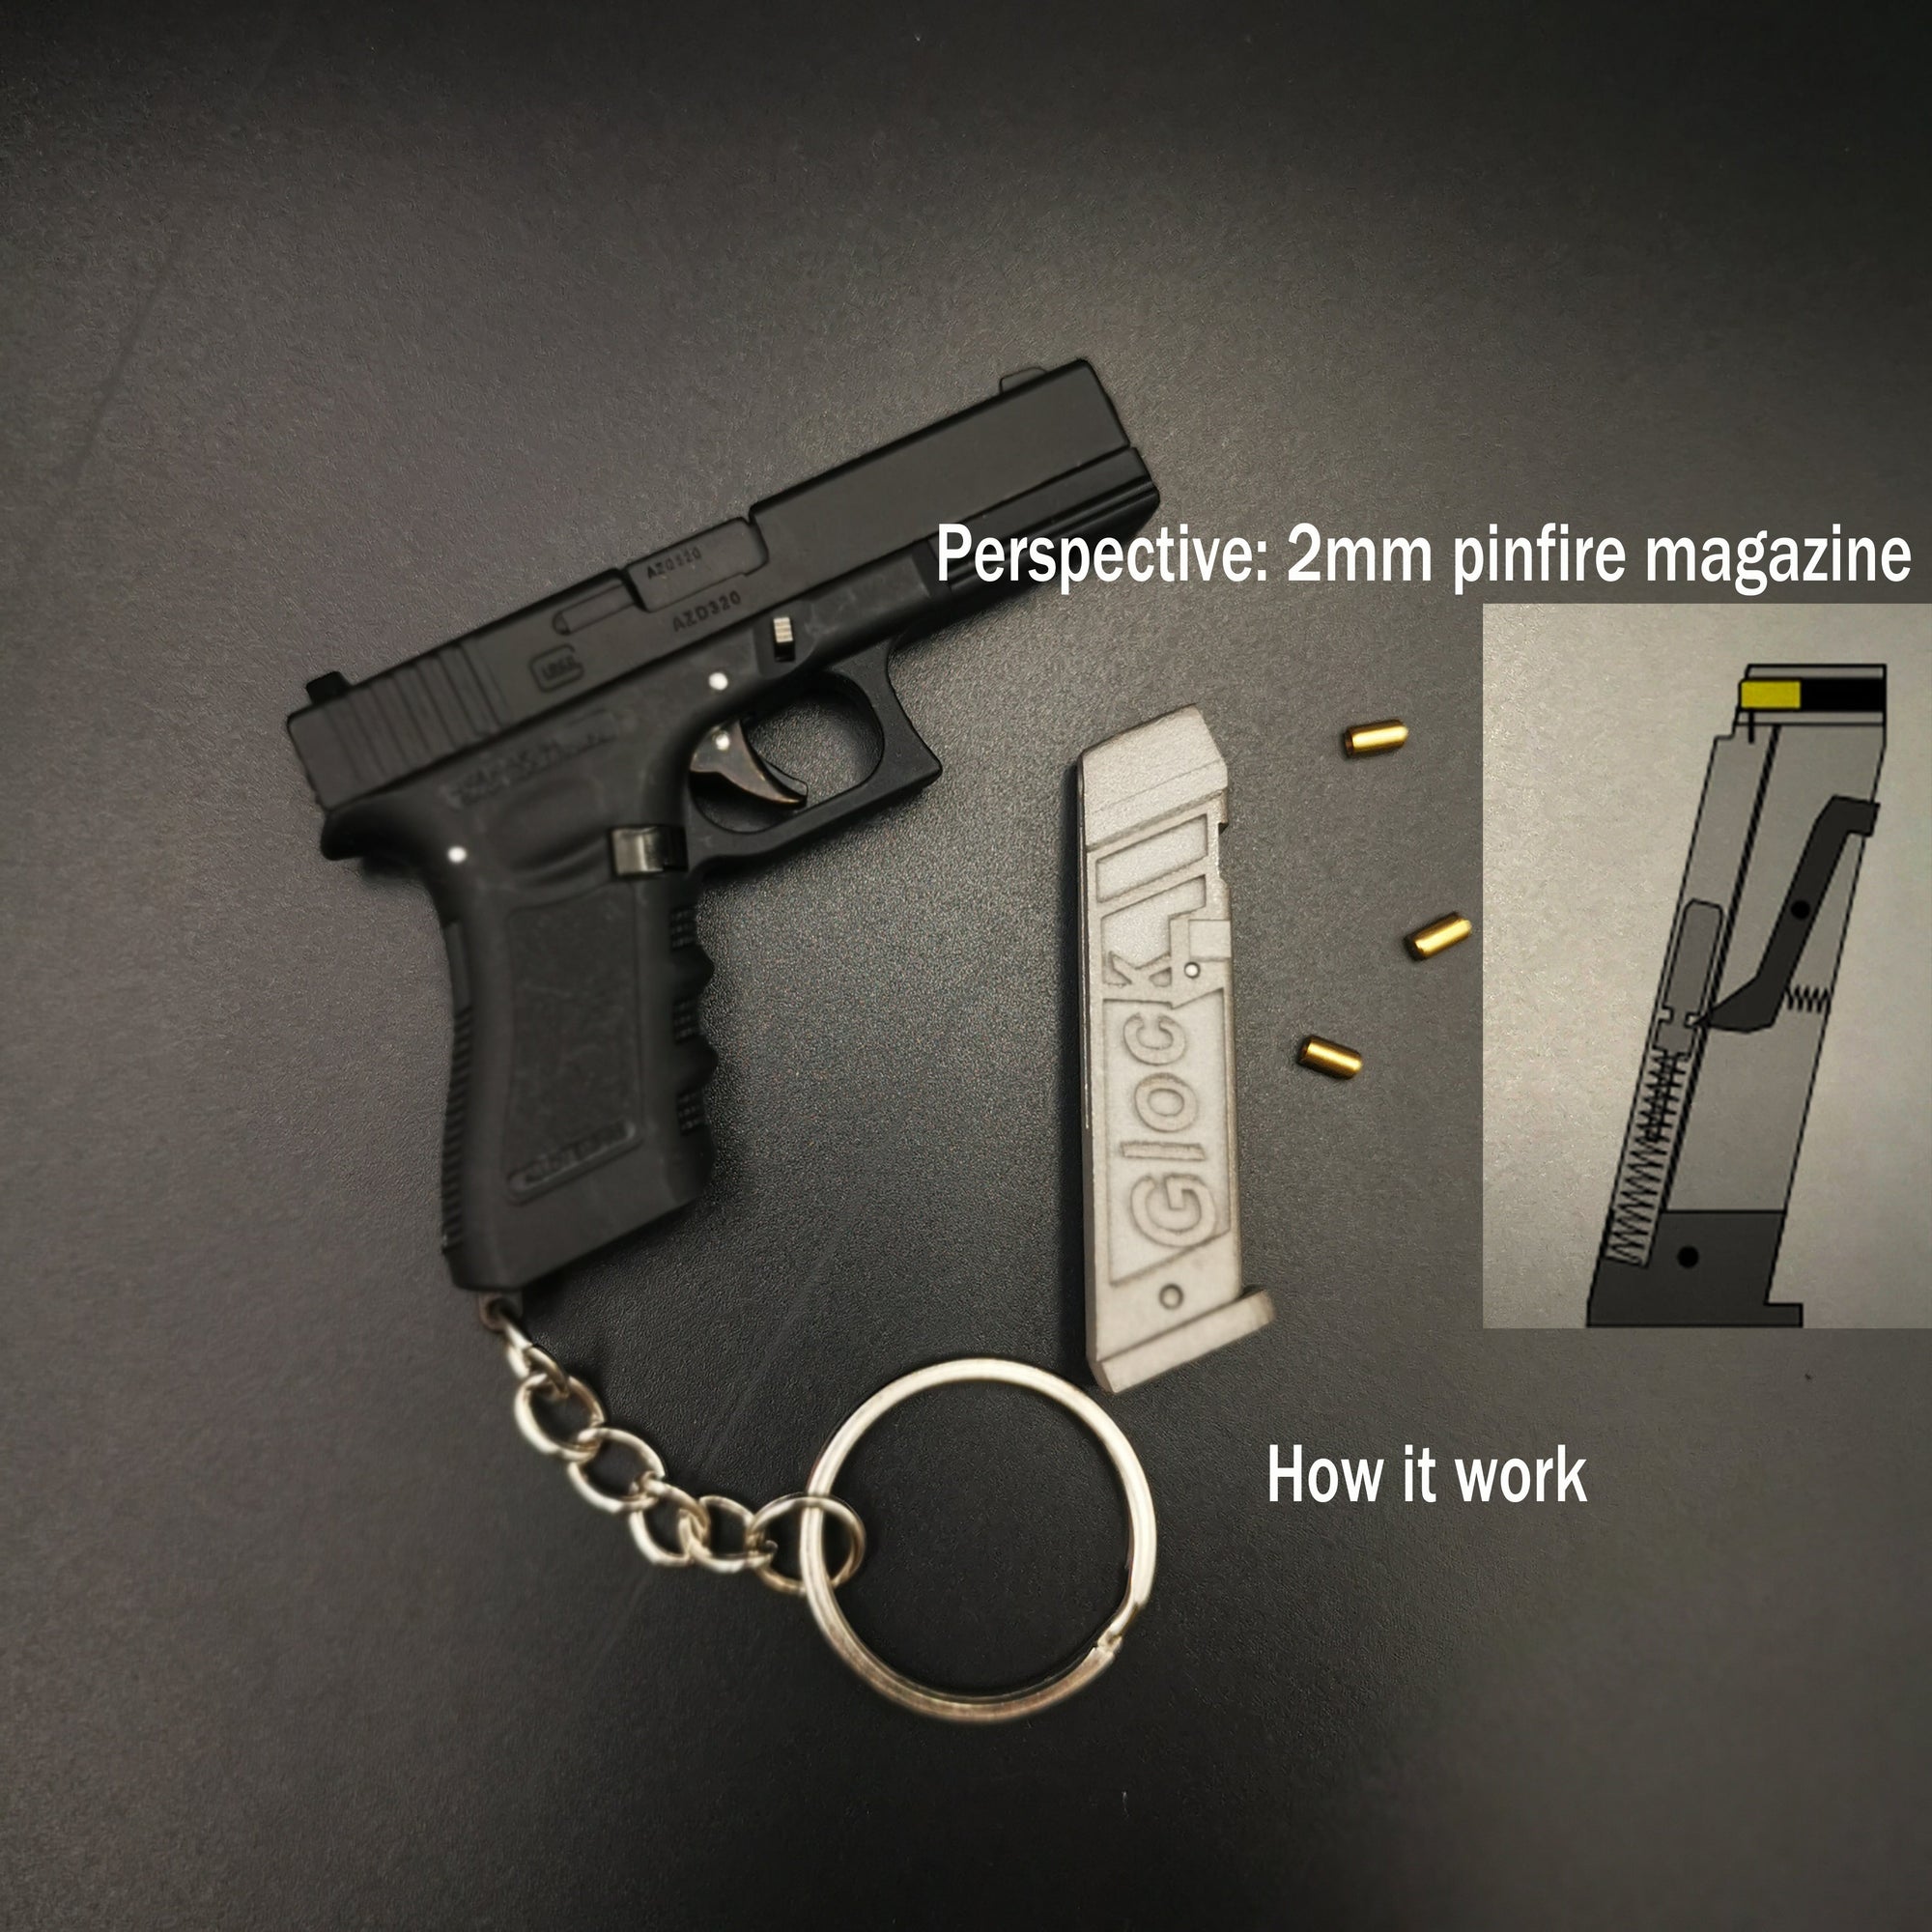 Introducing the Limited Edition Mini Glock Keychain